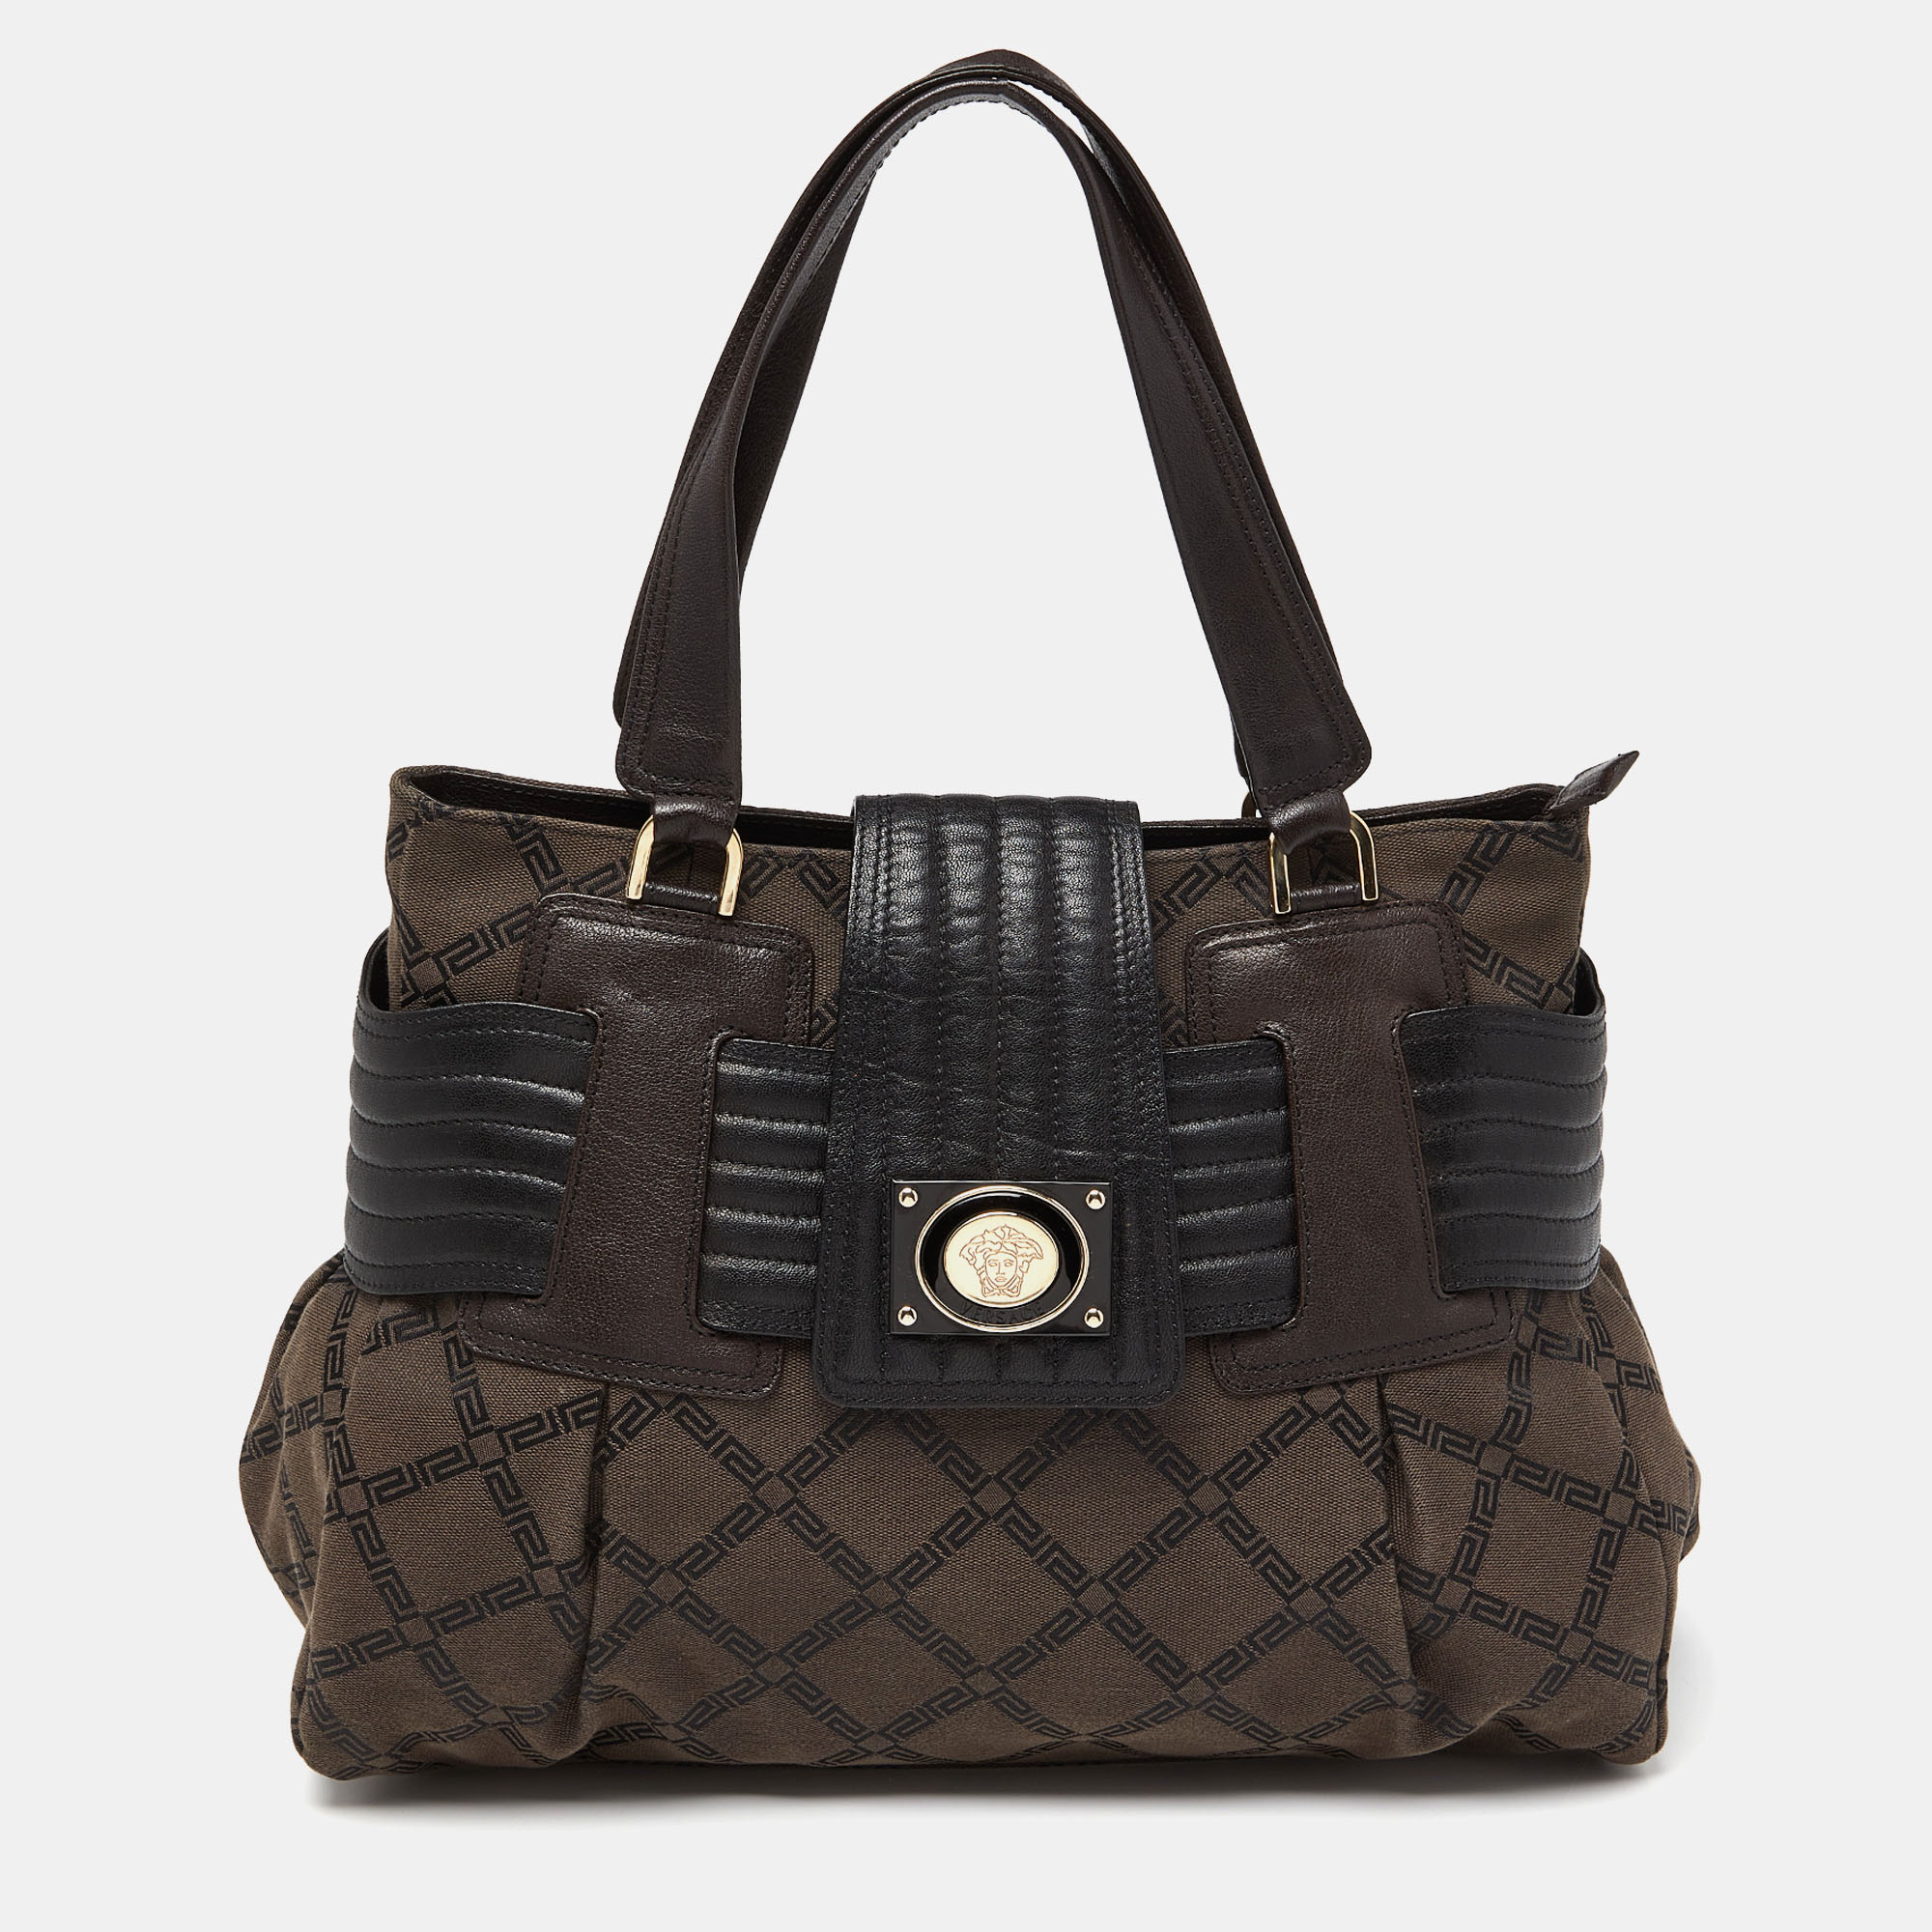 Ensure your days essentials are in order and your outfit is complete with this Versace tote. Crafted using Monogram fabric and leather the bag has two handles the Medusa logo on the front and a satin lined interior.